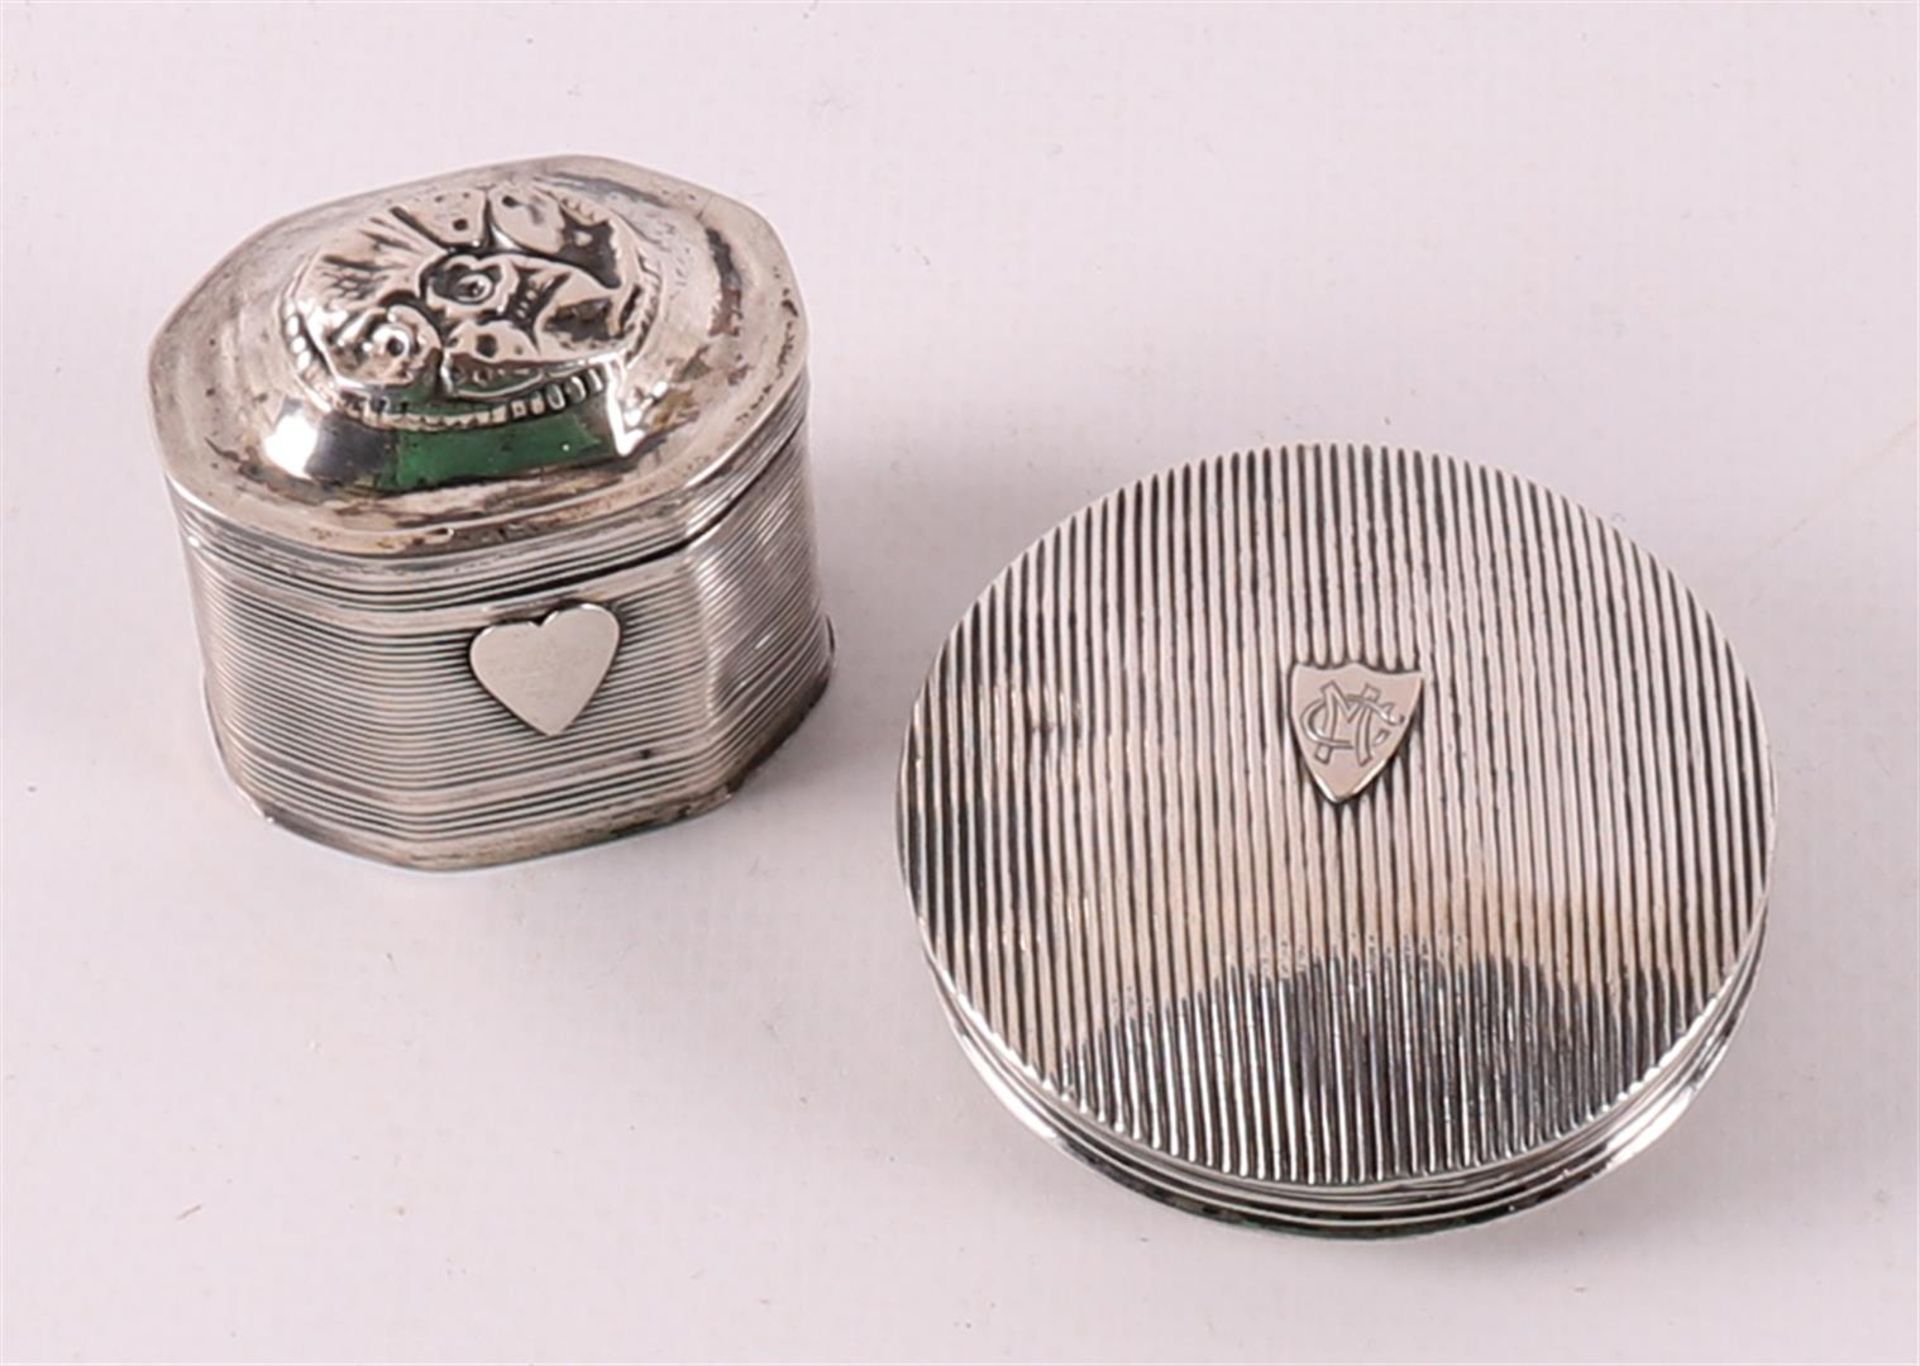 A silver lodderein box and peppermint box, 19th century.